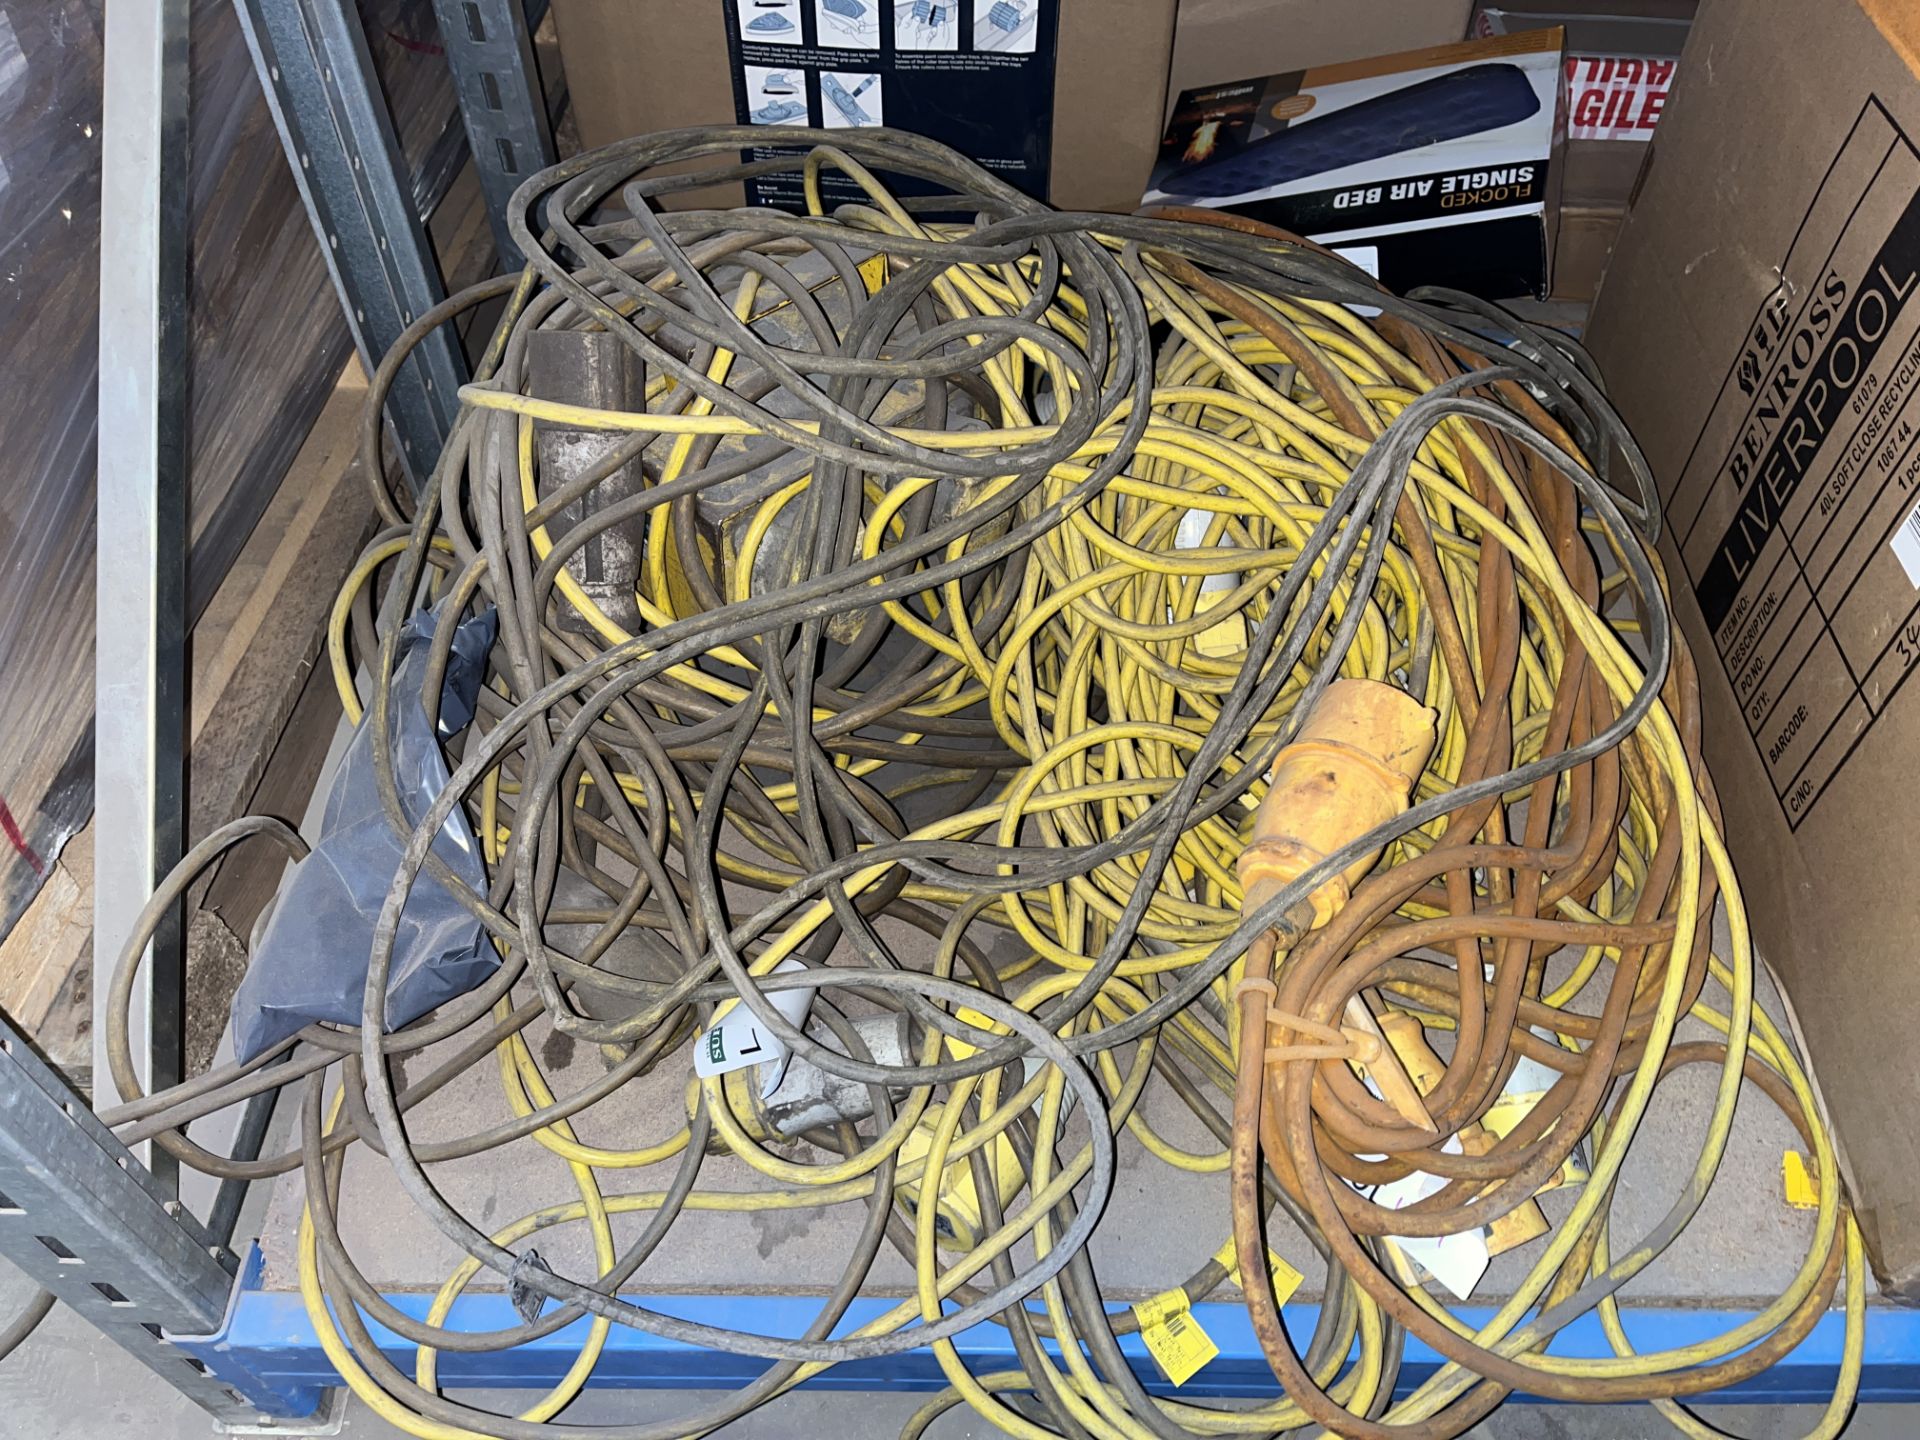 LARGE QUANTITY OF COMMERCIAL ELECTRICAL CABLES S1-8